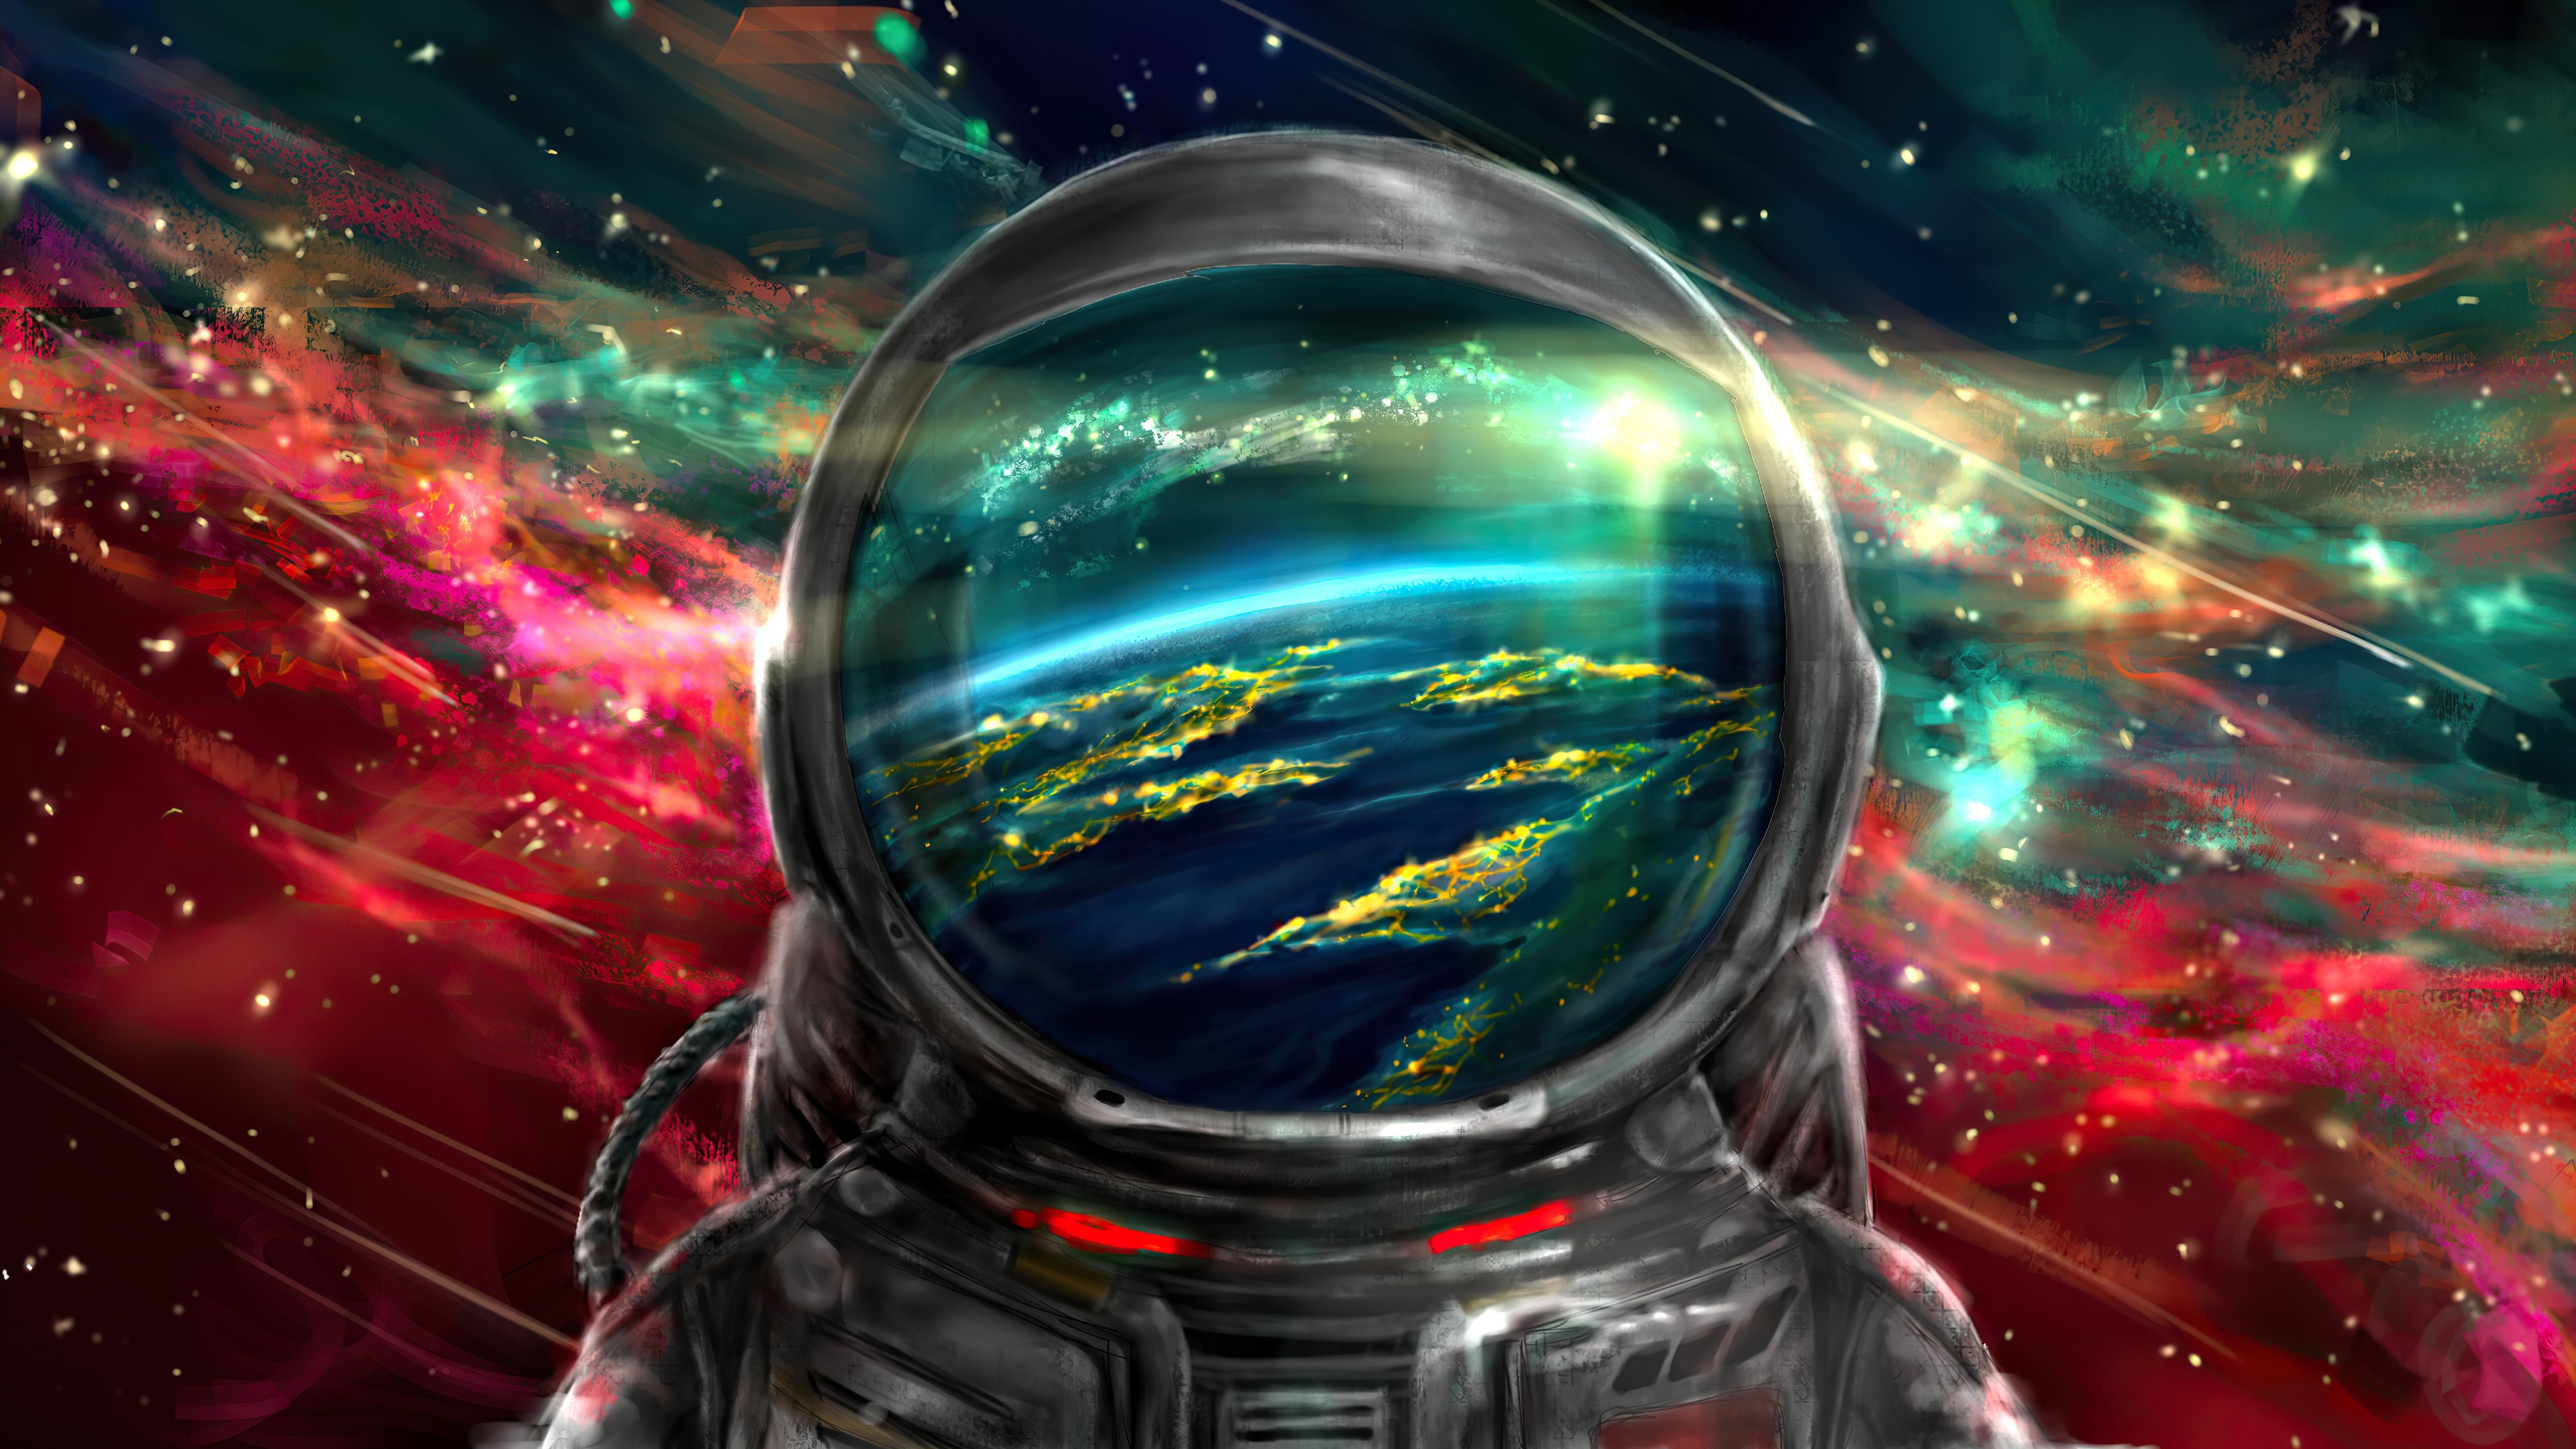 General 3840x2160 space space art astronaut colorful planet reflection stars vV-ave